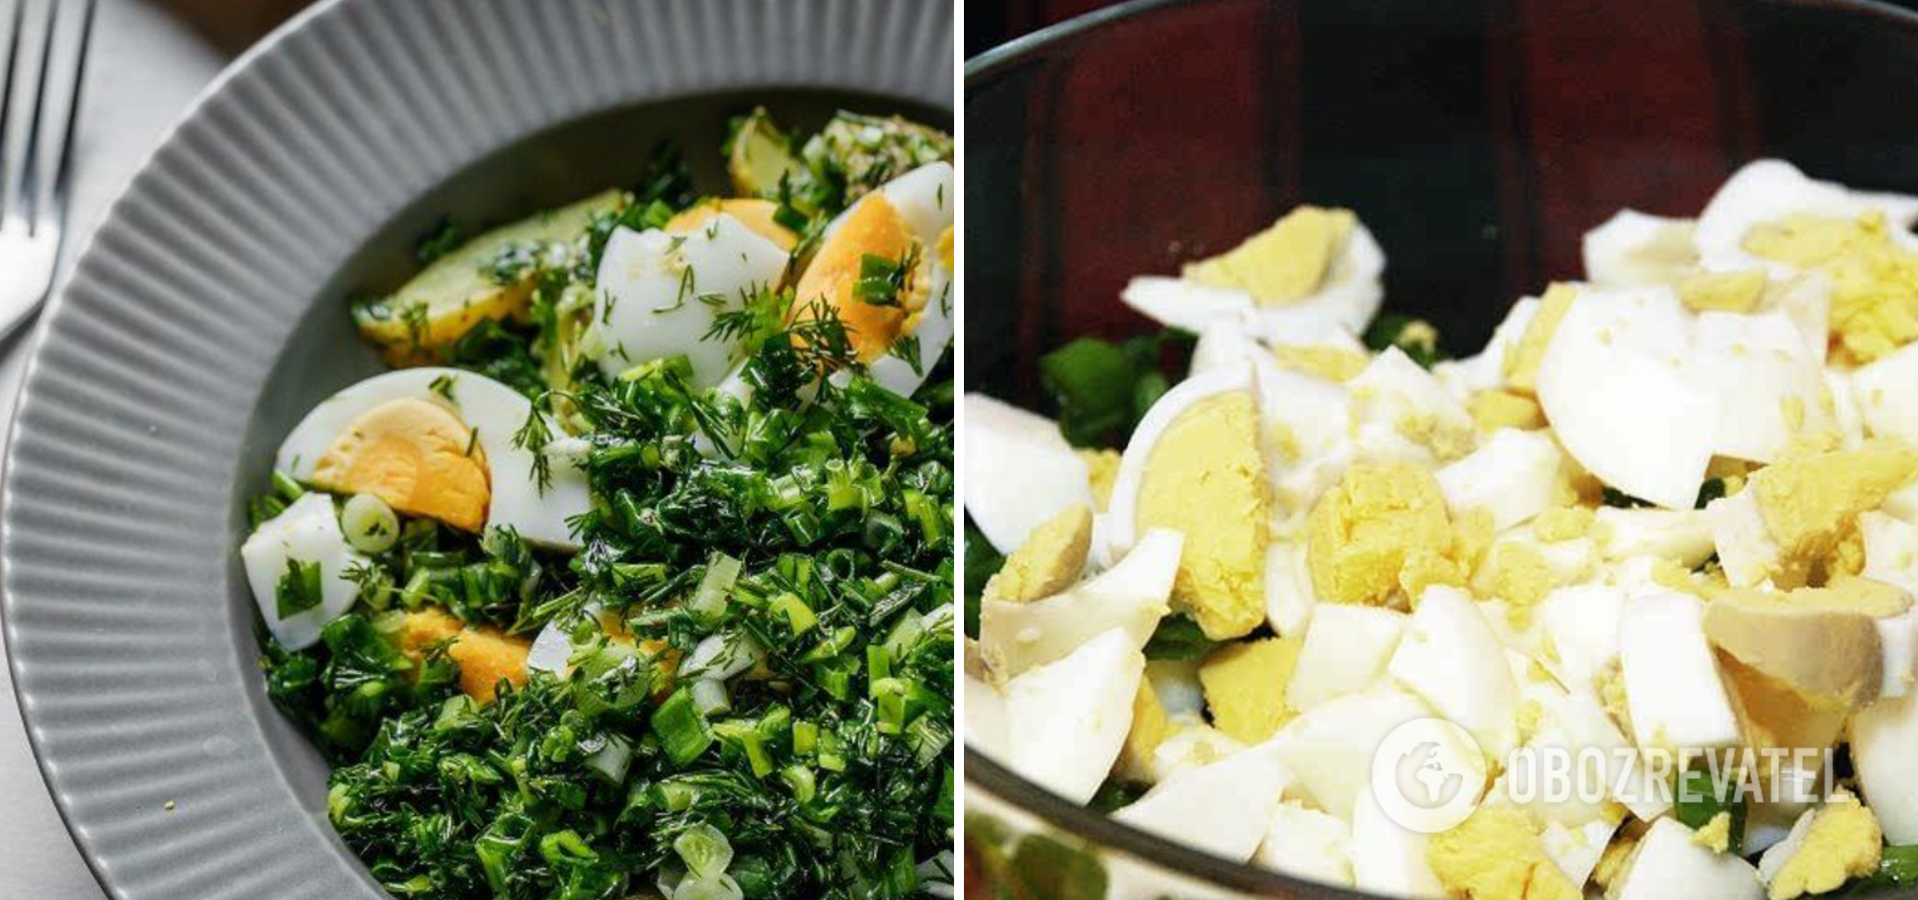 Egg and green onion salad with no mayonnaise